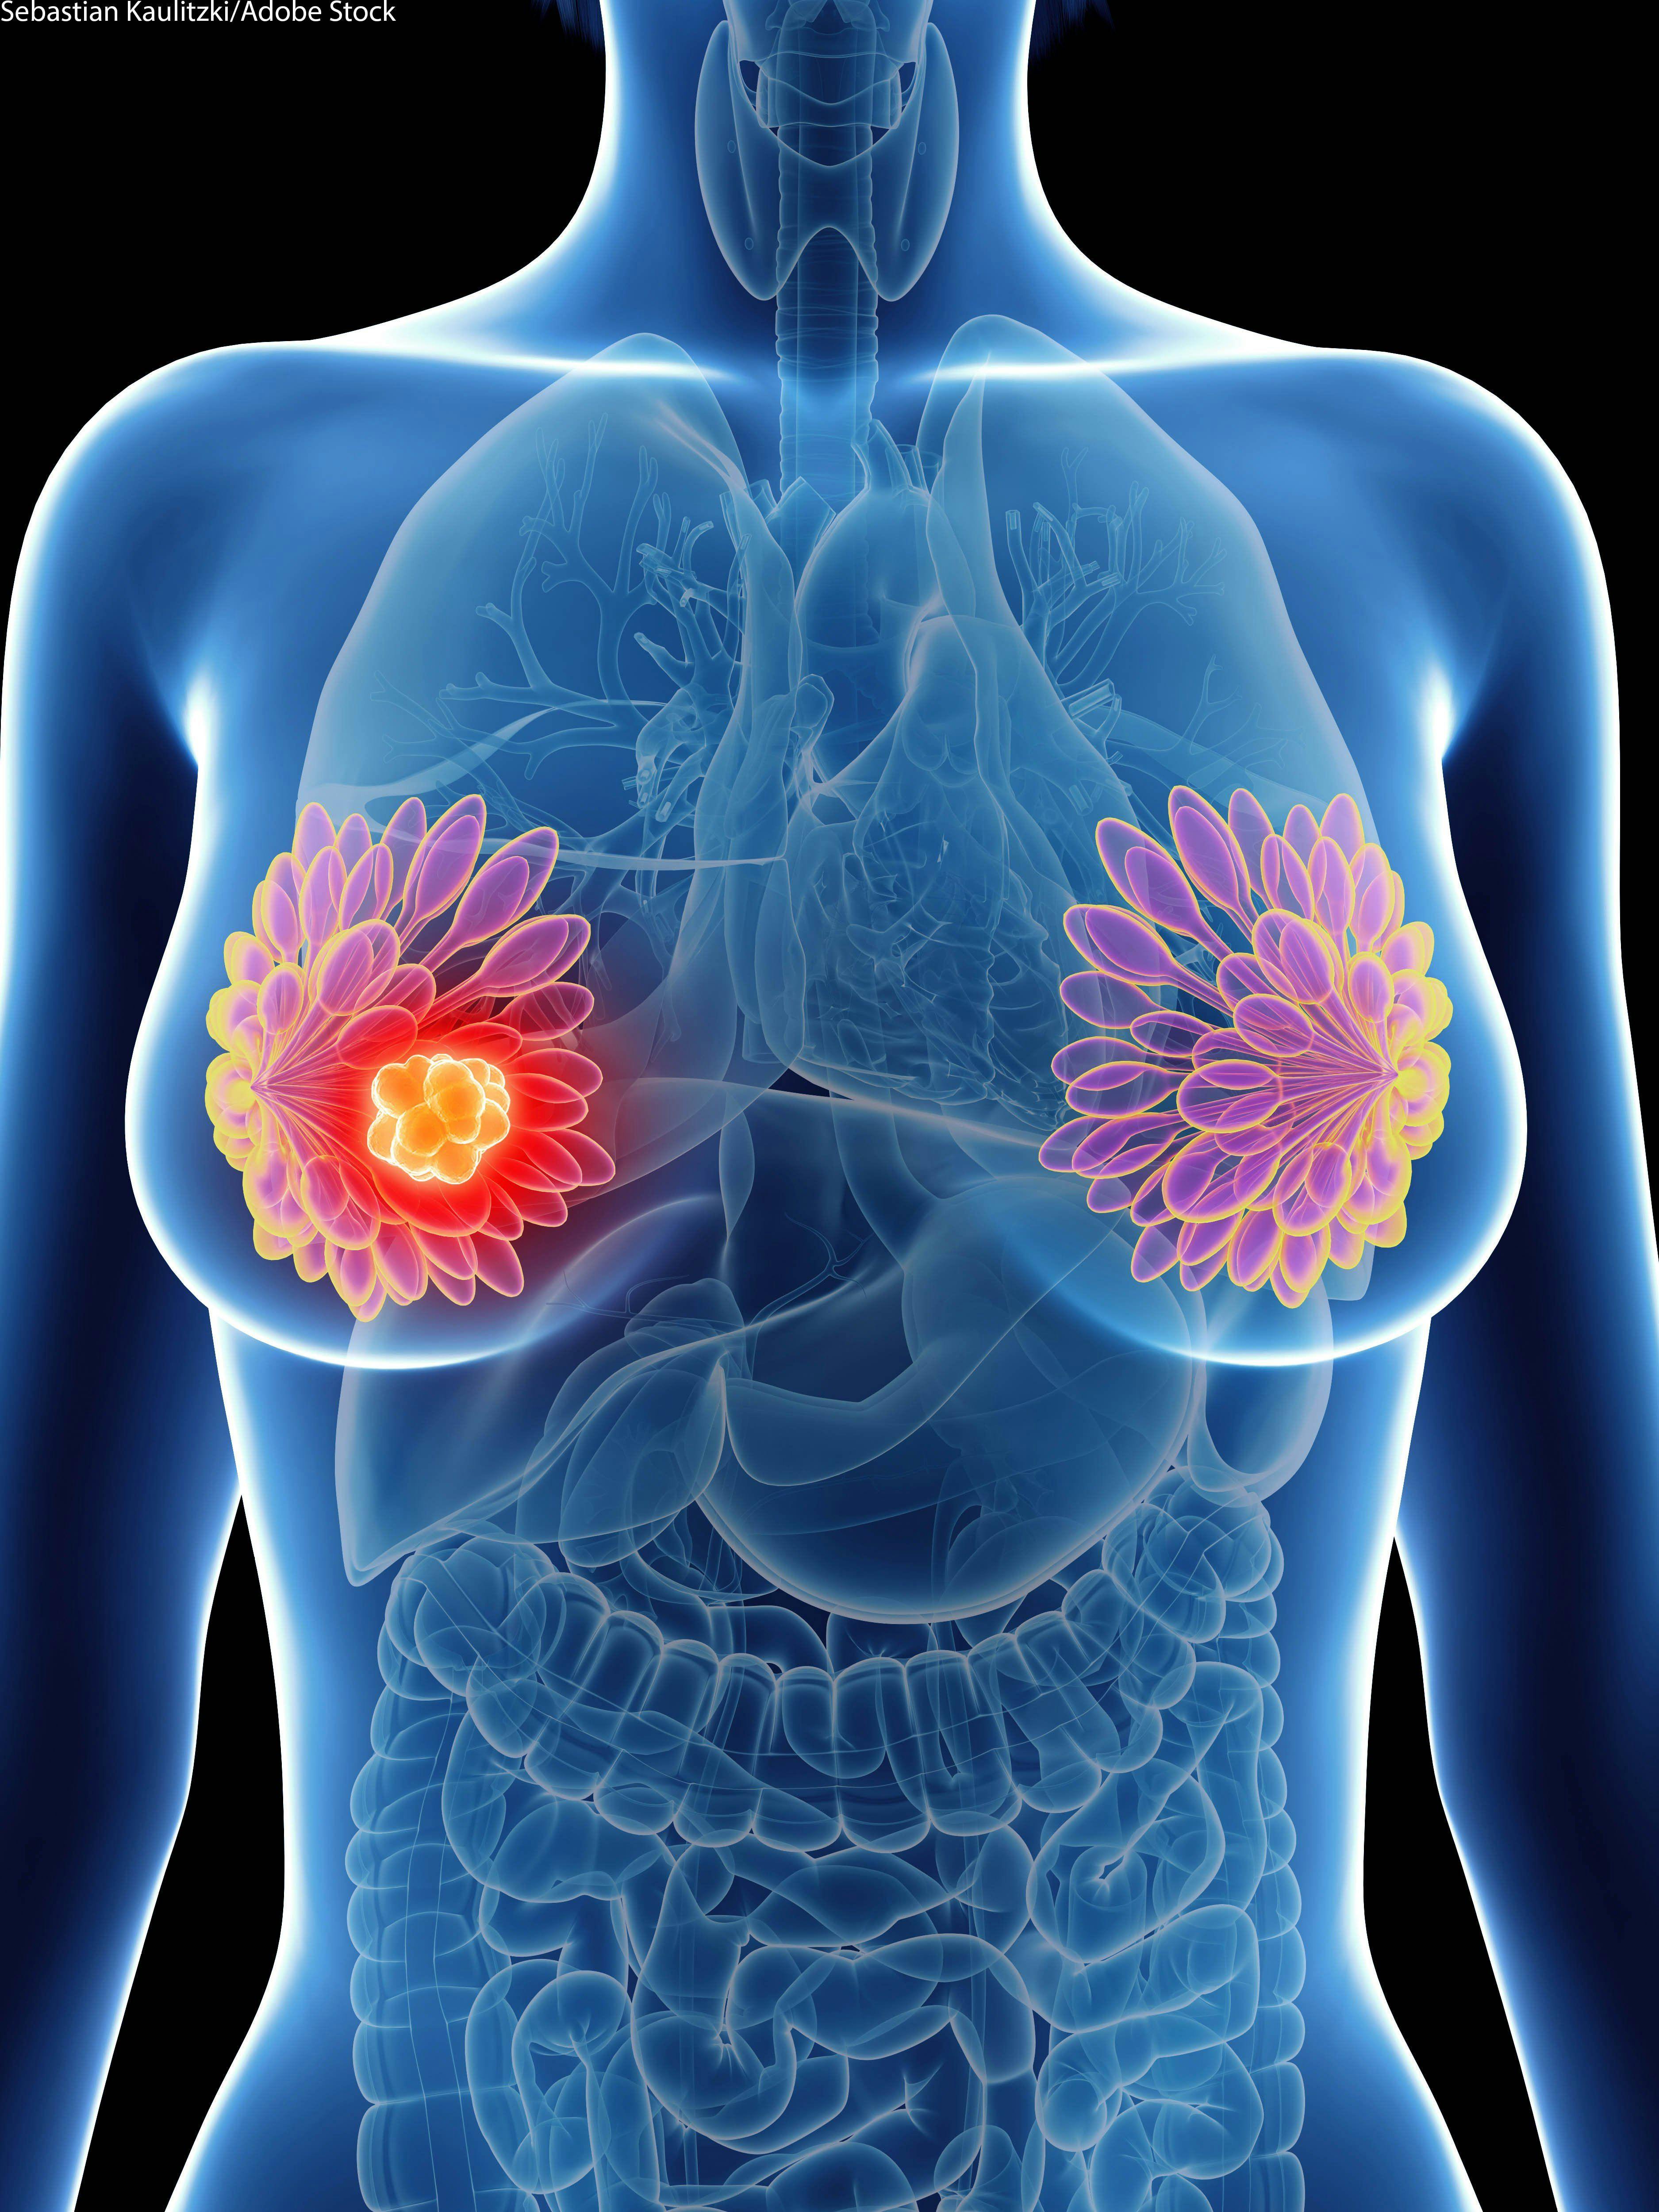 Minority Women with Breast Cancer Show More Variants of Uncertain Significance 